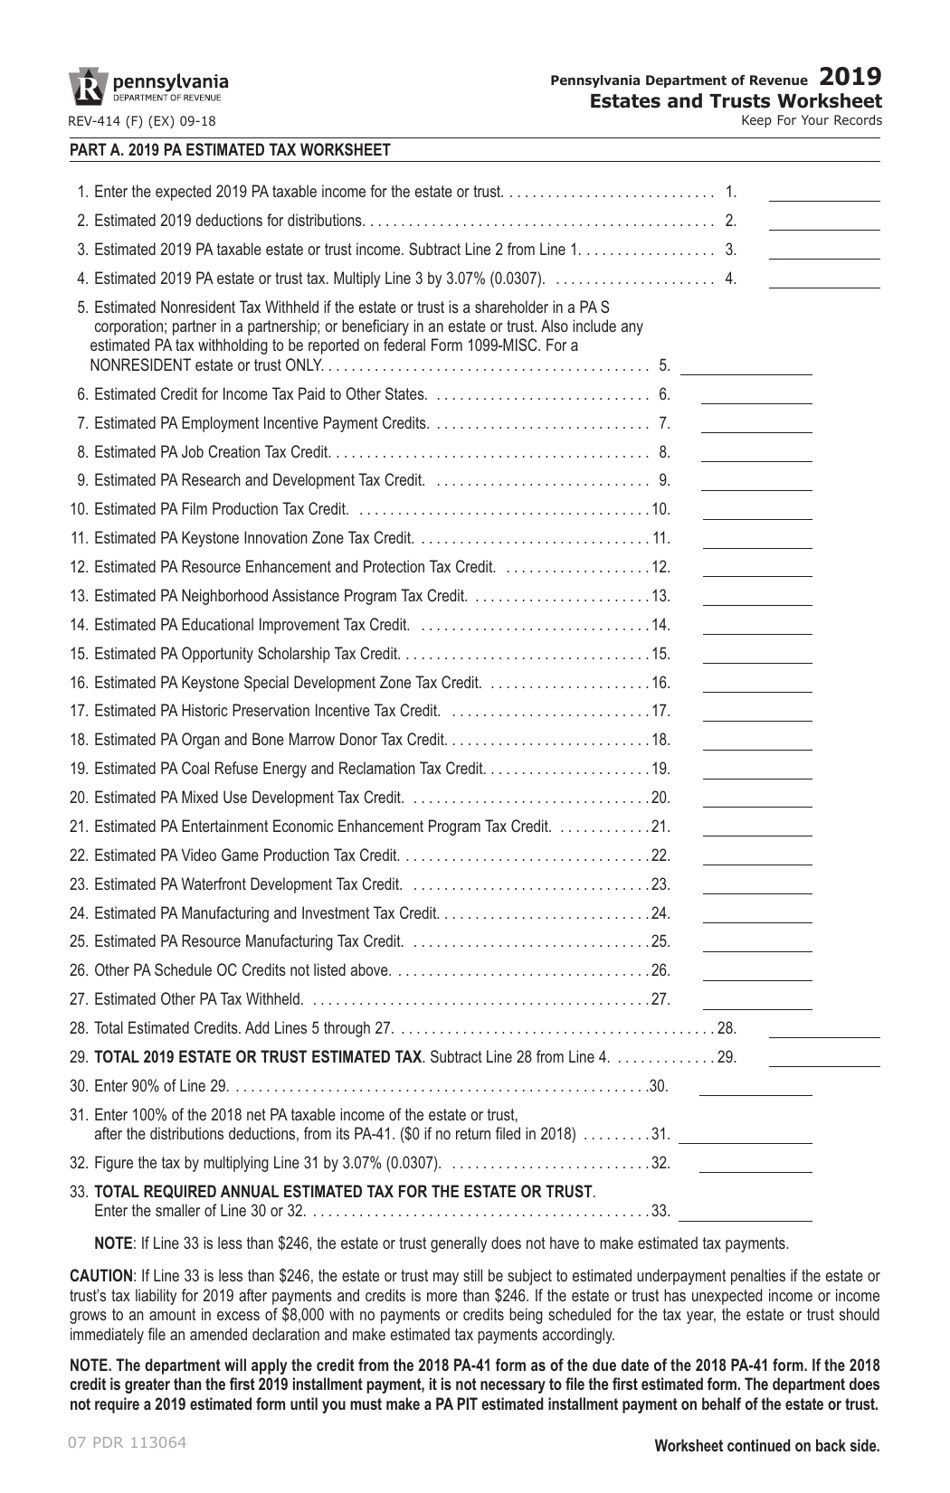 Form REV-414 (F) Estates and Trusts Worksheet - Pennsylvania, Page 1